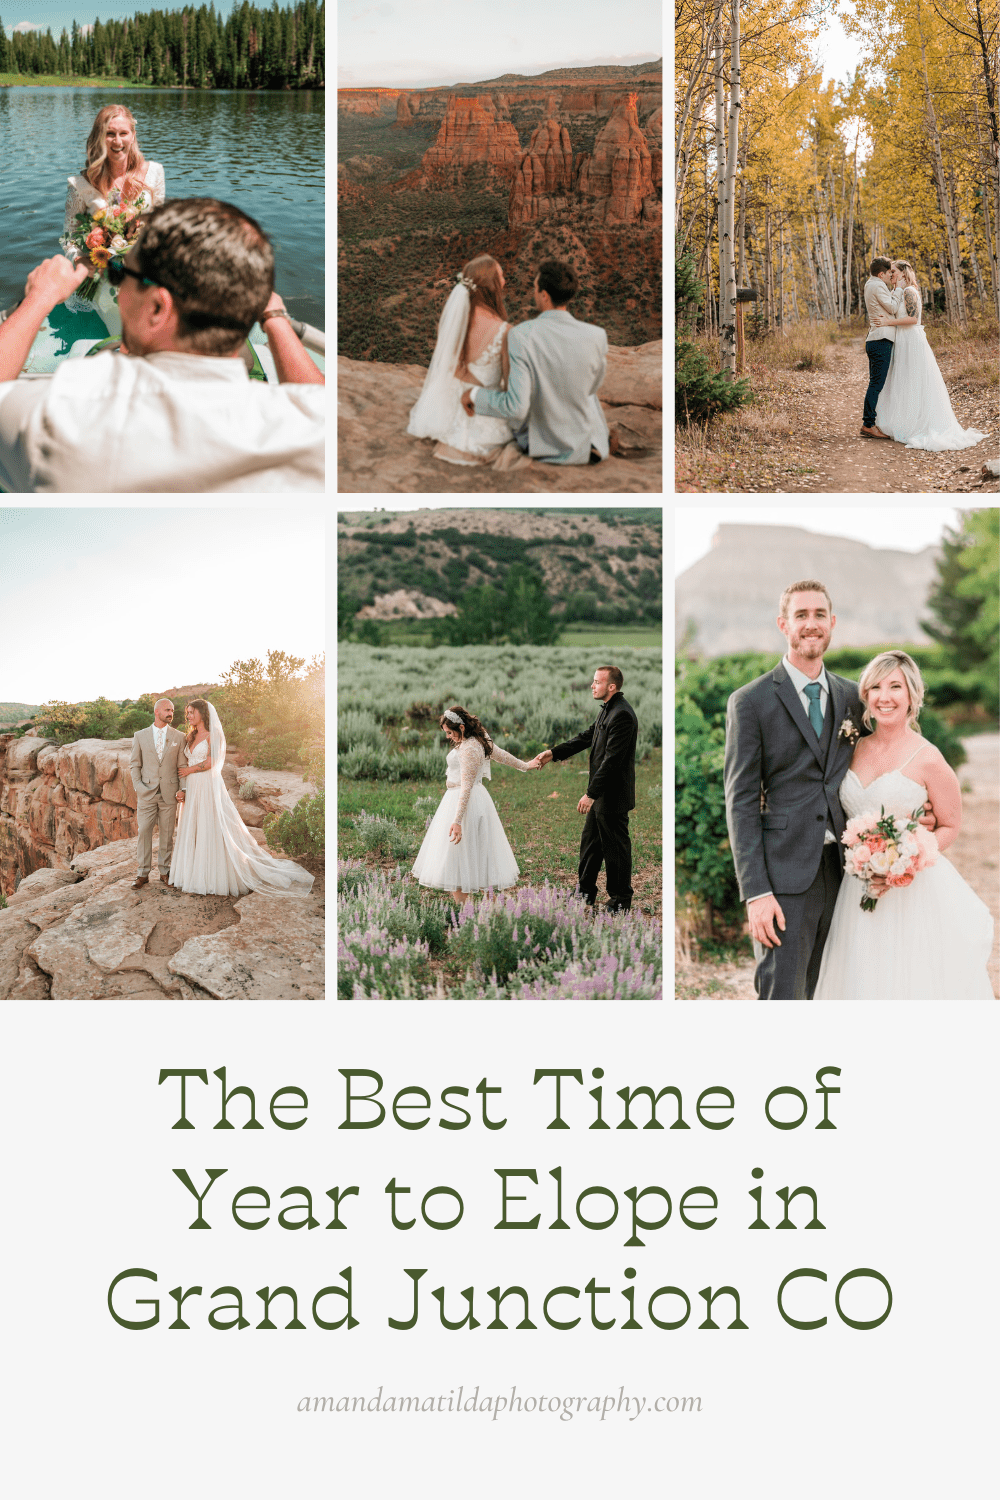 The Best Time of Year to Elope in Grand Junction